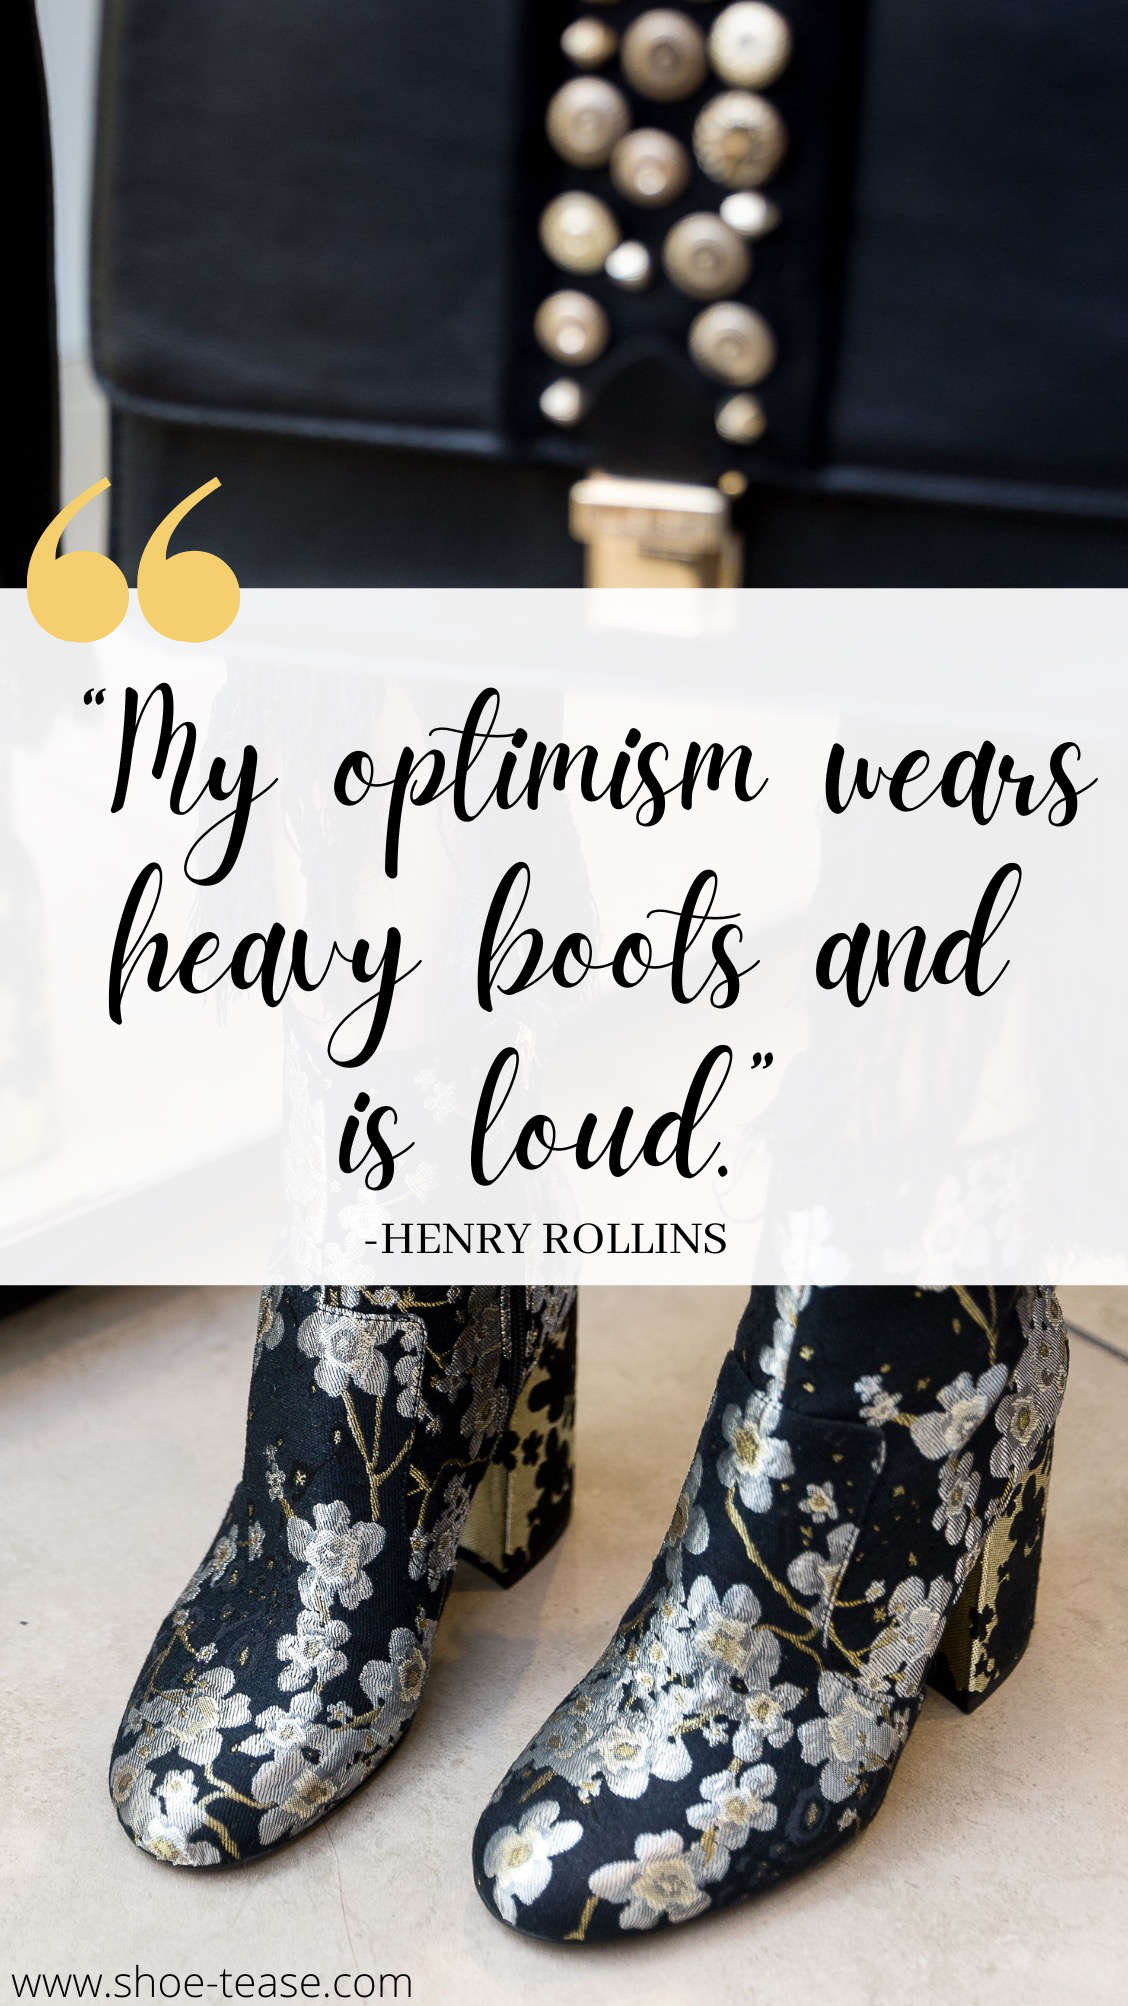 Text reading my optimism wears many boots and is loud over image of woman wearing brocade bold and black boots holding gold charmed black purse.